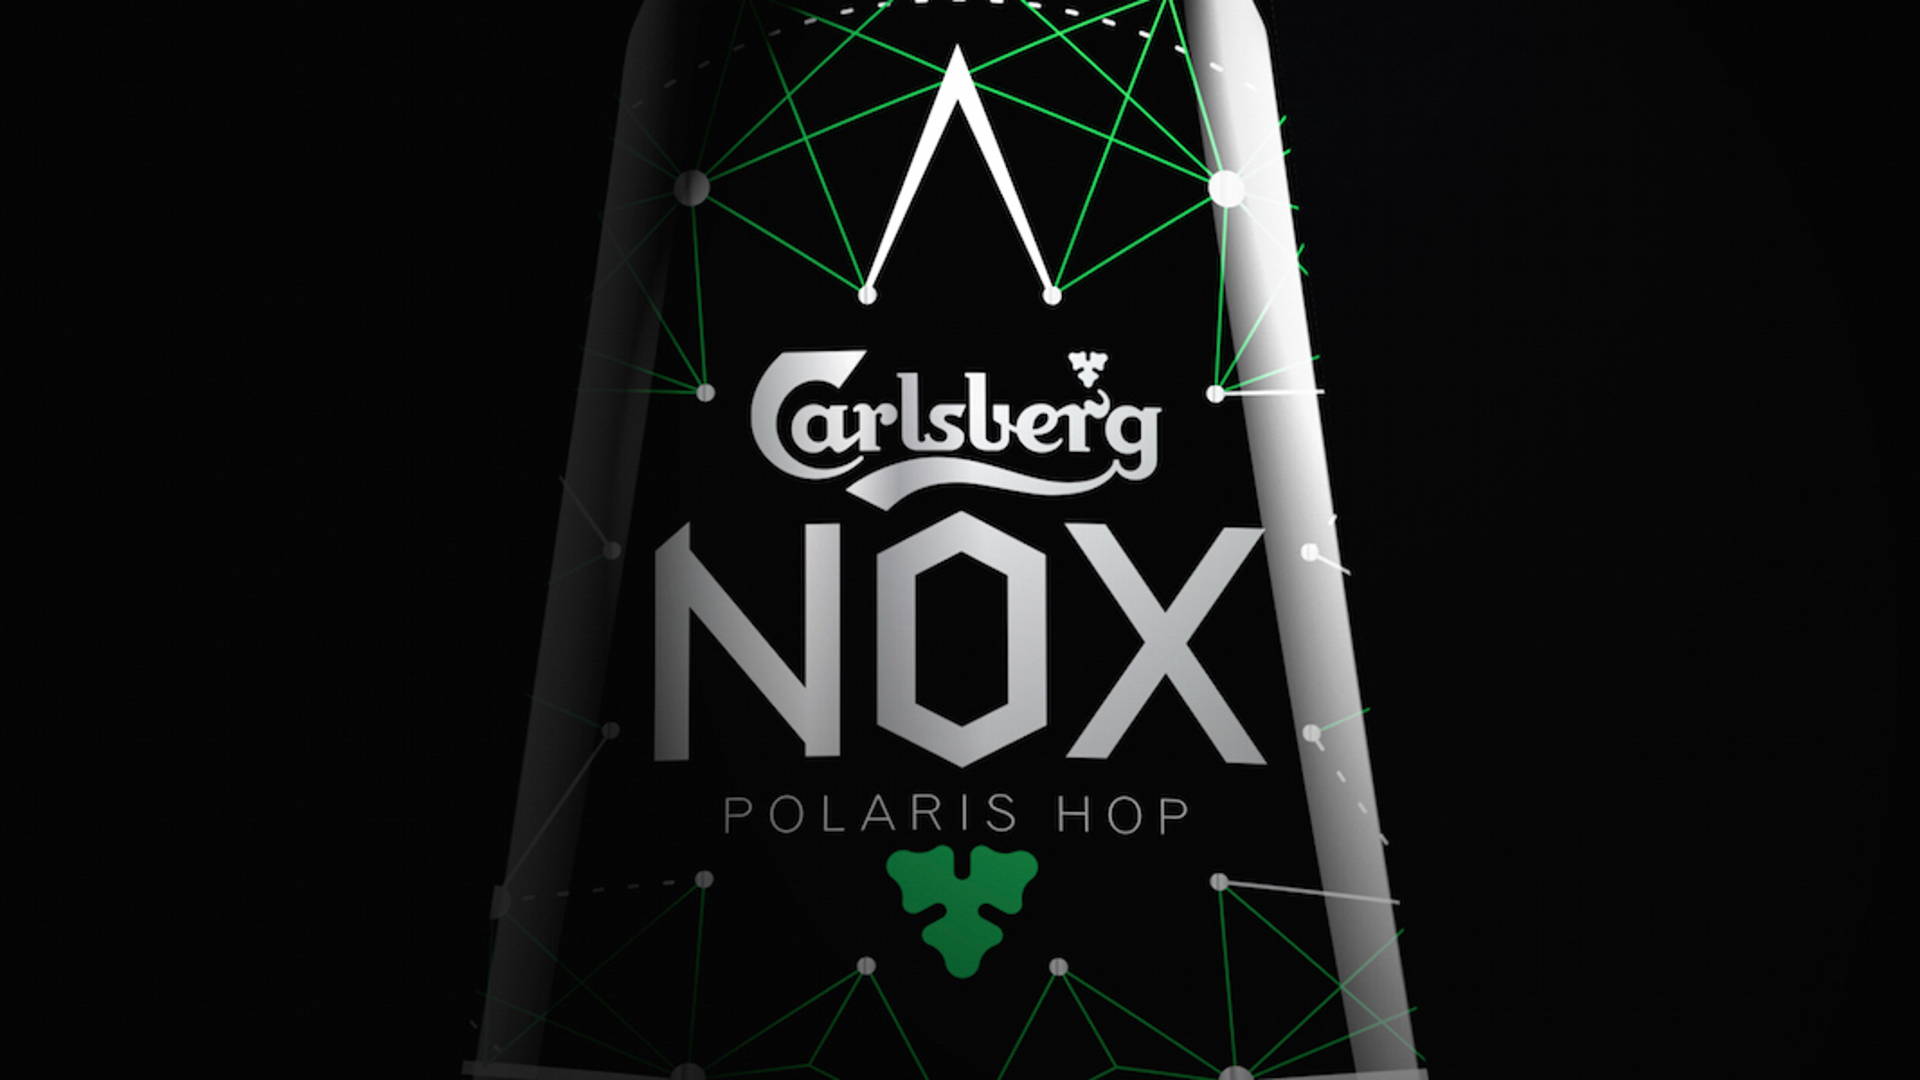 Featured image for Carlsberg NOX